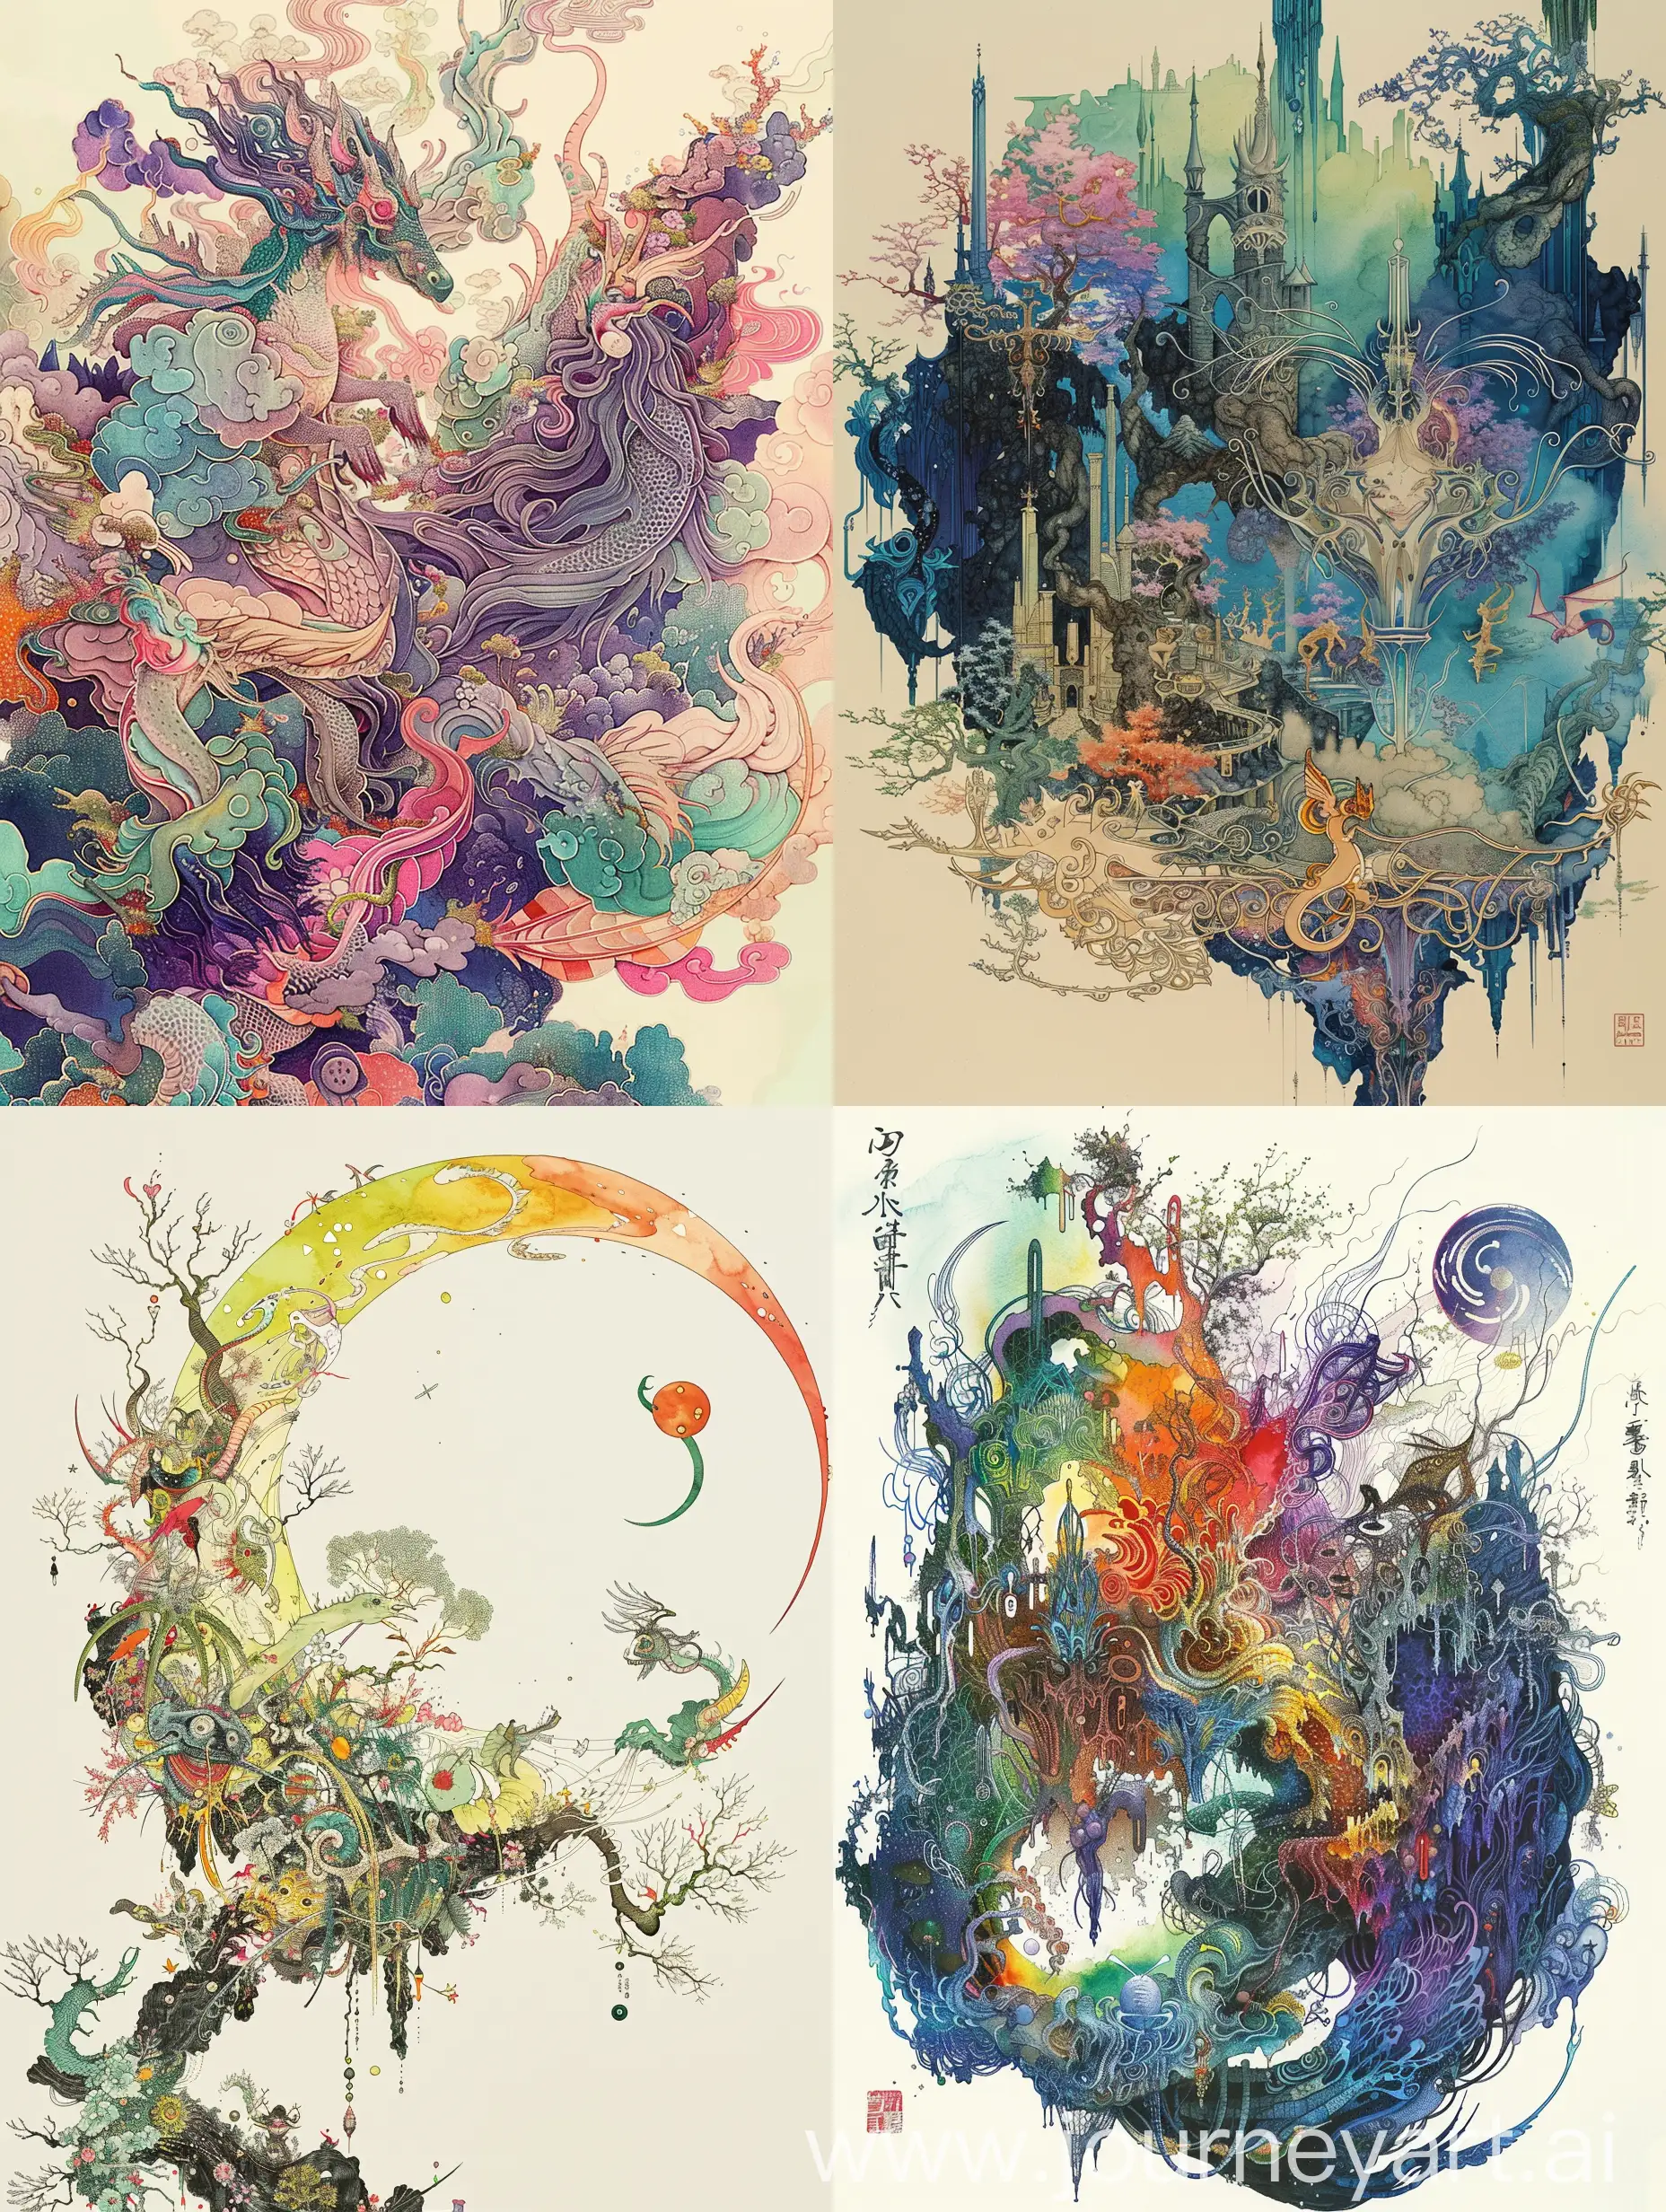 Yoshitaka Amano’s visual style is ethereal and intricate, blending delicate linework with vibrant colors. His illustrations often feature fantastical creatures and dreamlike landscapes, creating a sense of otherworldly beauty.